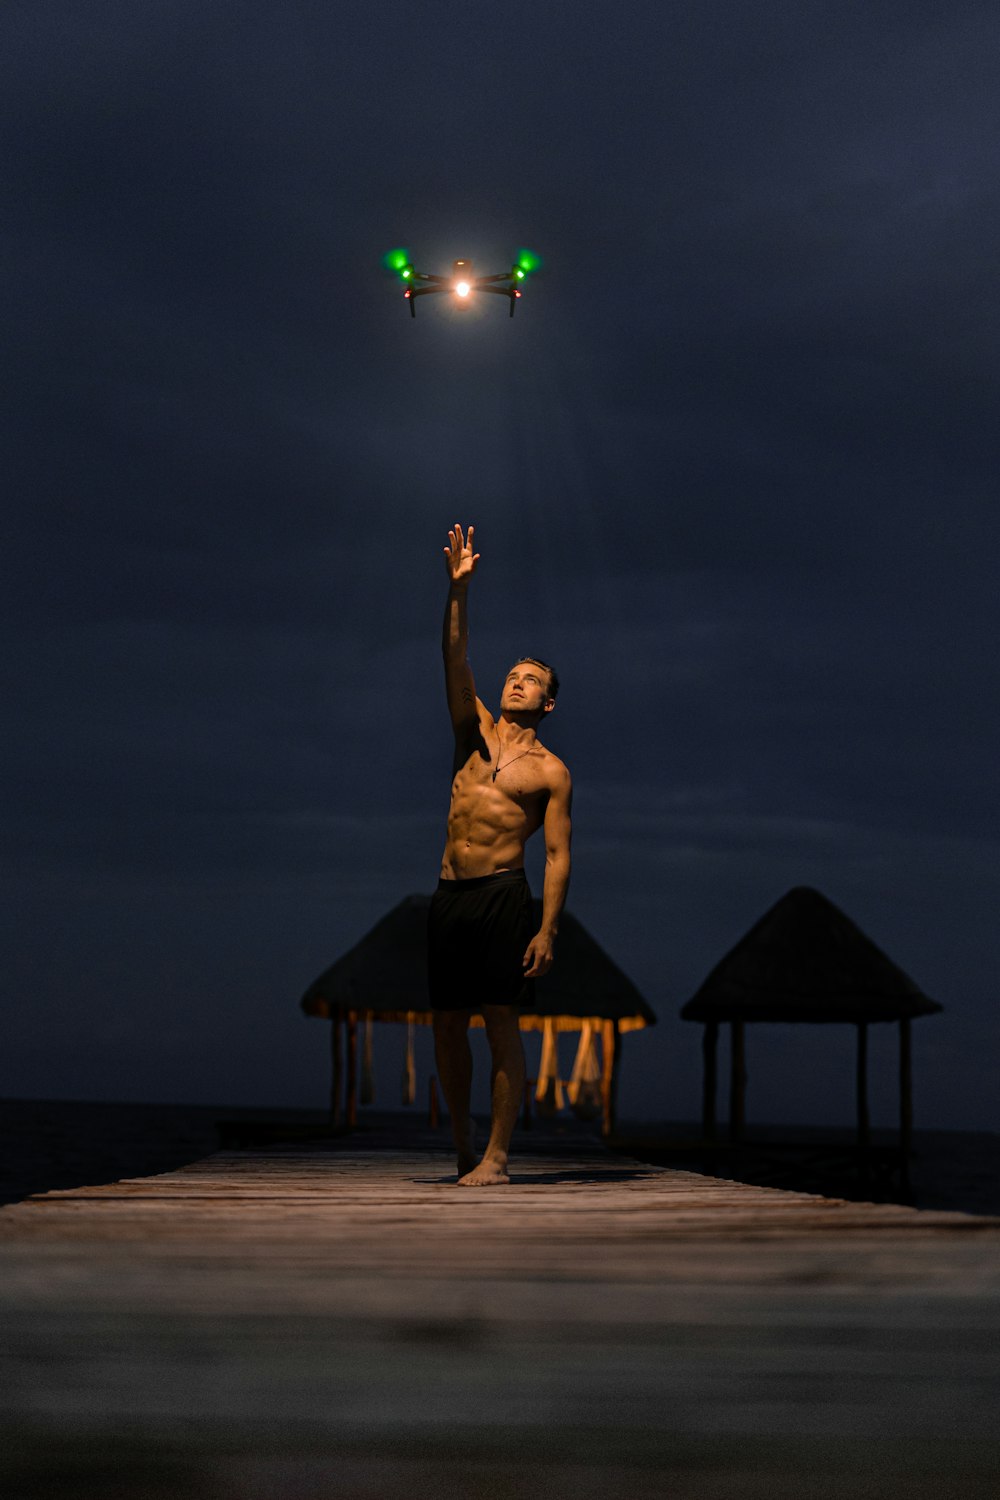 a man is flying a kite on a pier